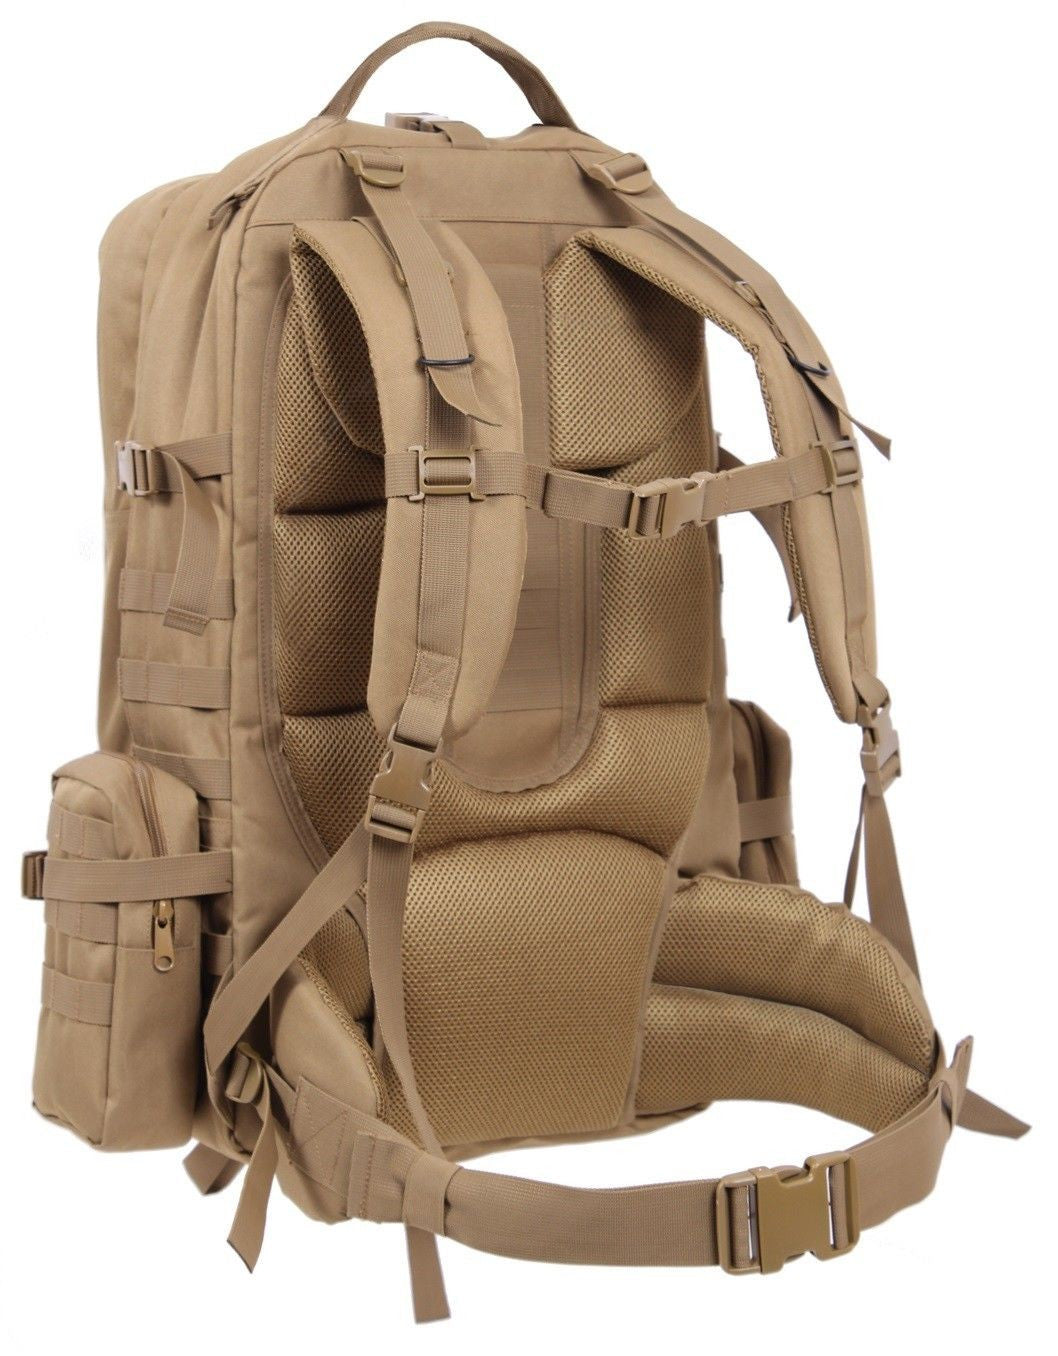 Coyote Brown 3-Day Global Pack 25" Tactical MOLLE Outdoor Gear Bag